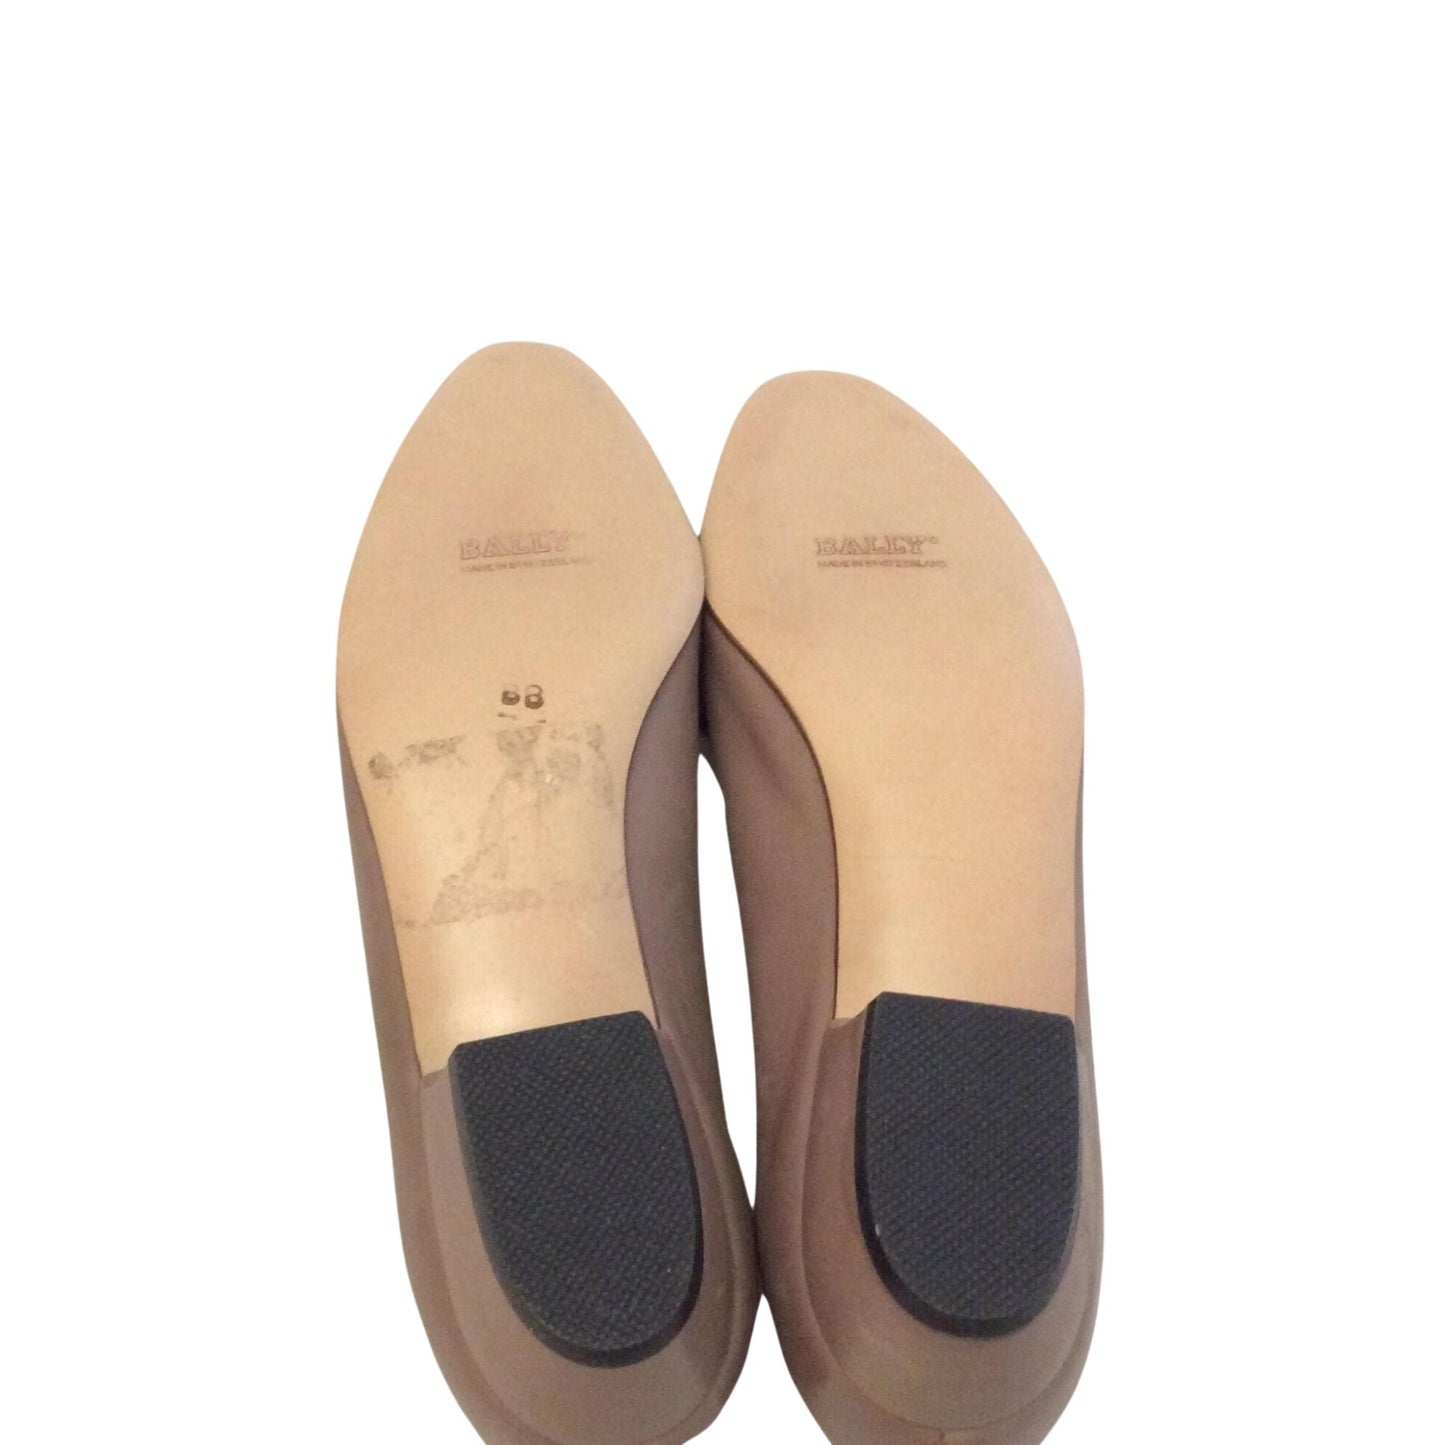 1990s Bally Flat Shoes 6.5 / Taupe / Vintage 1990s